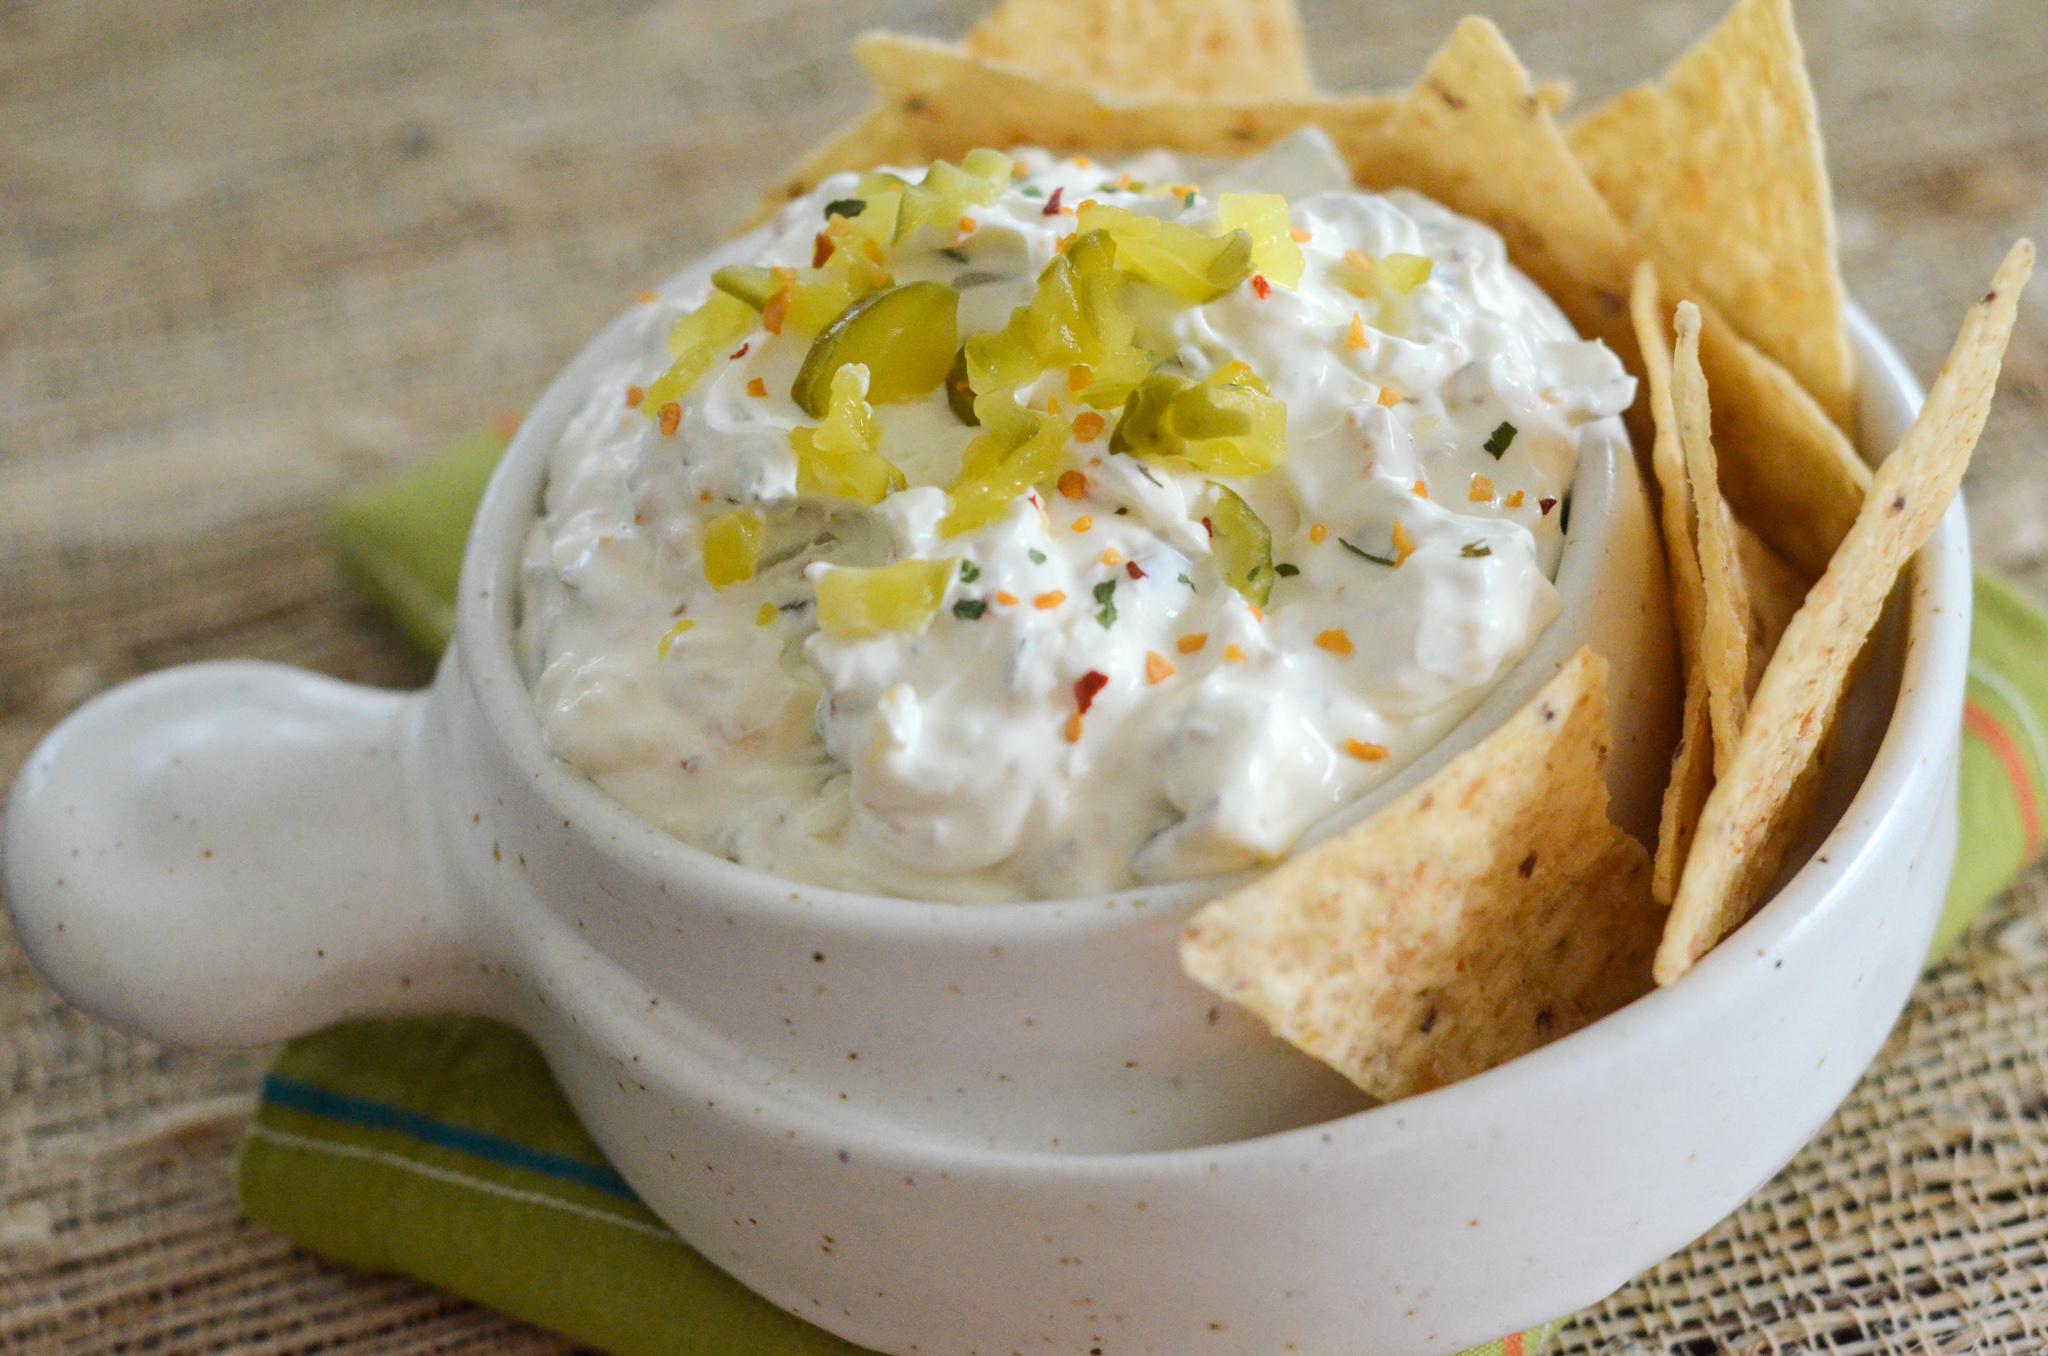 Dill Pickle Dip Recipe with Sour Cream - The Gifted Gabber